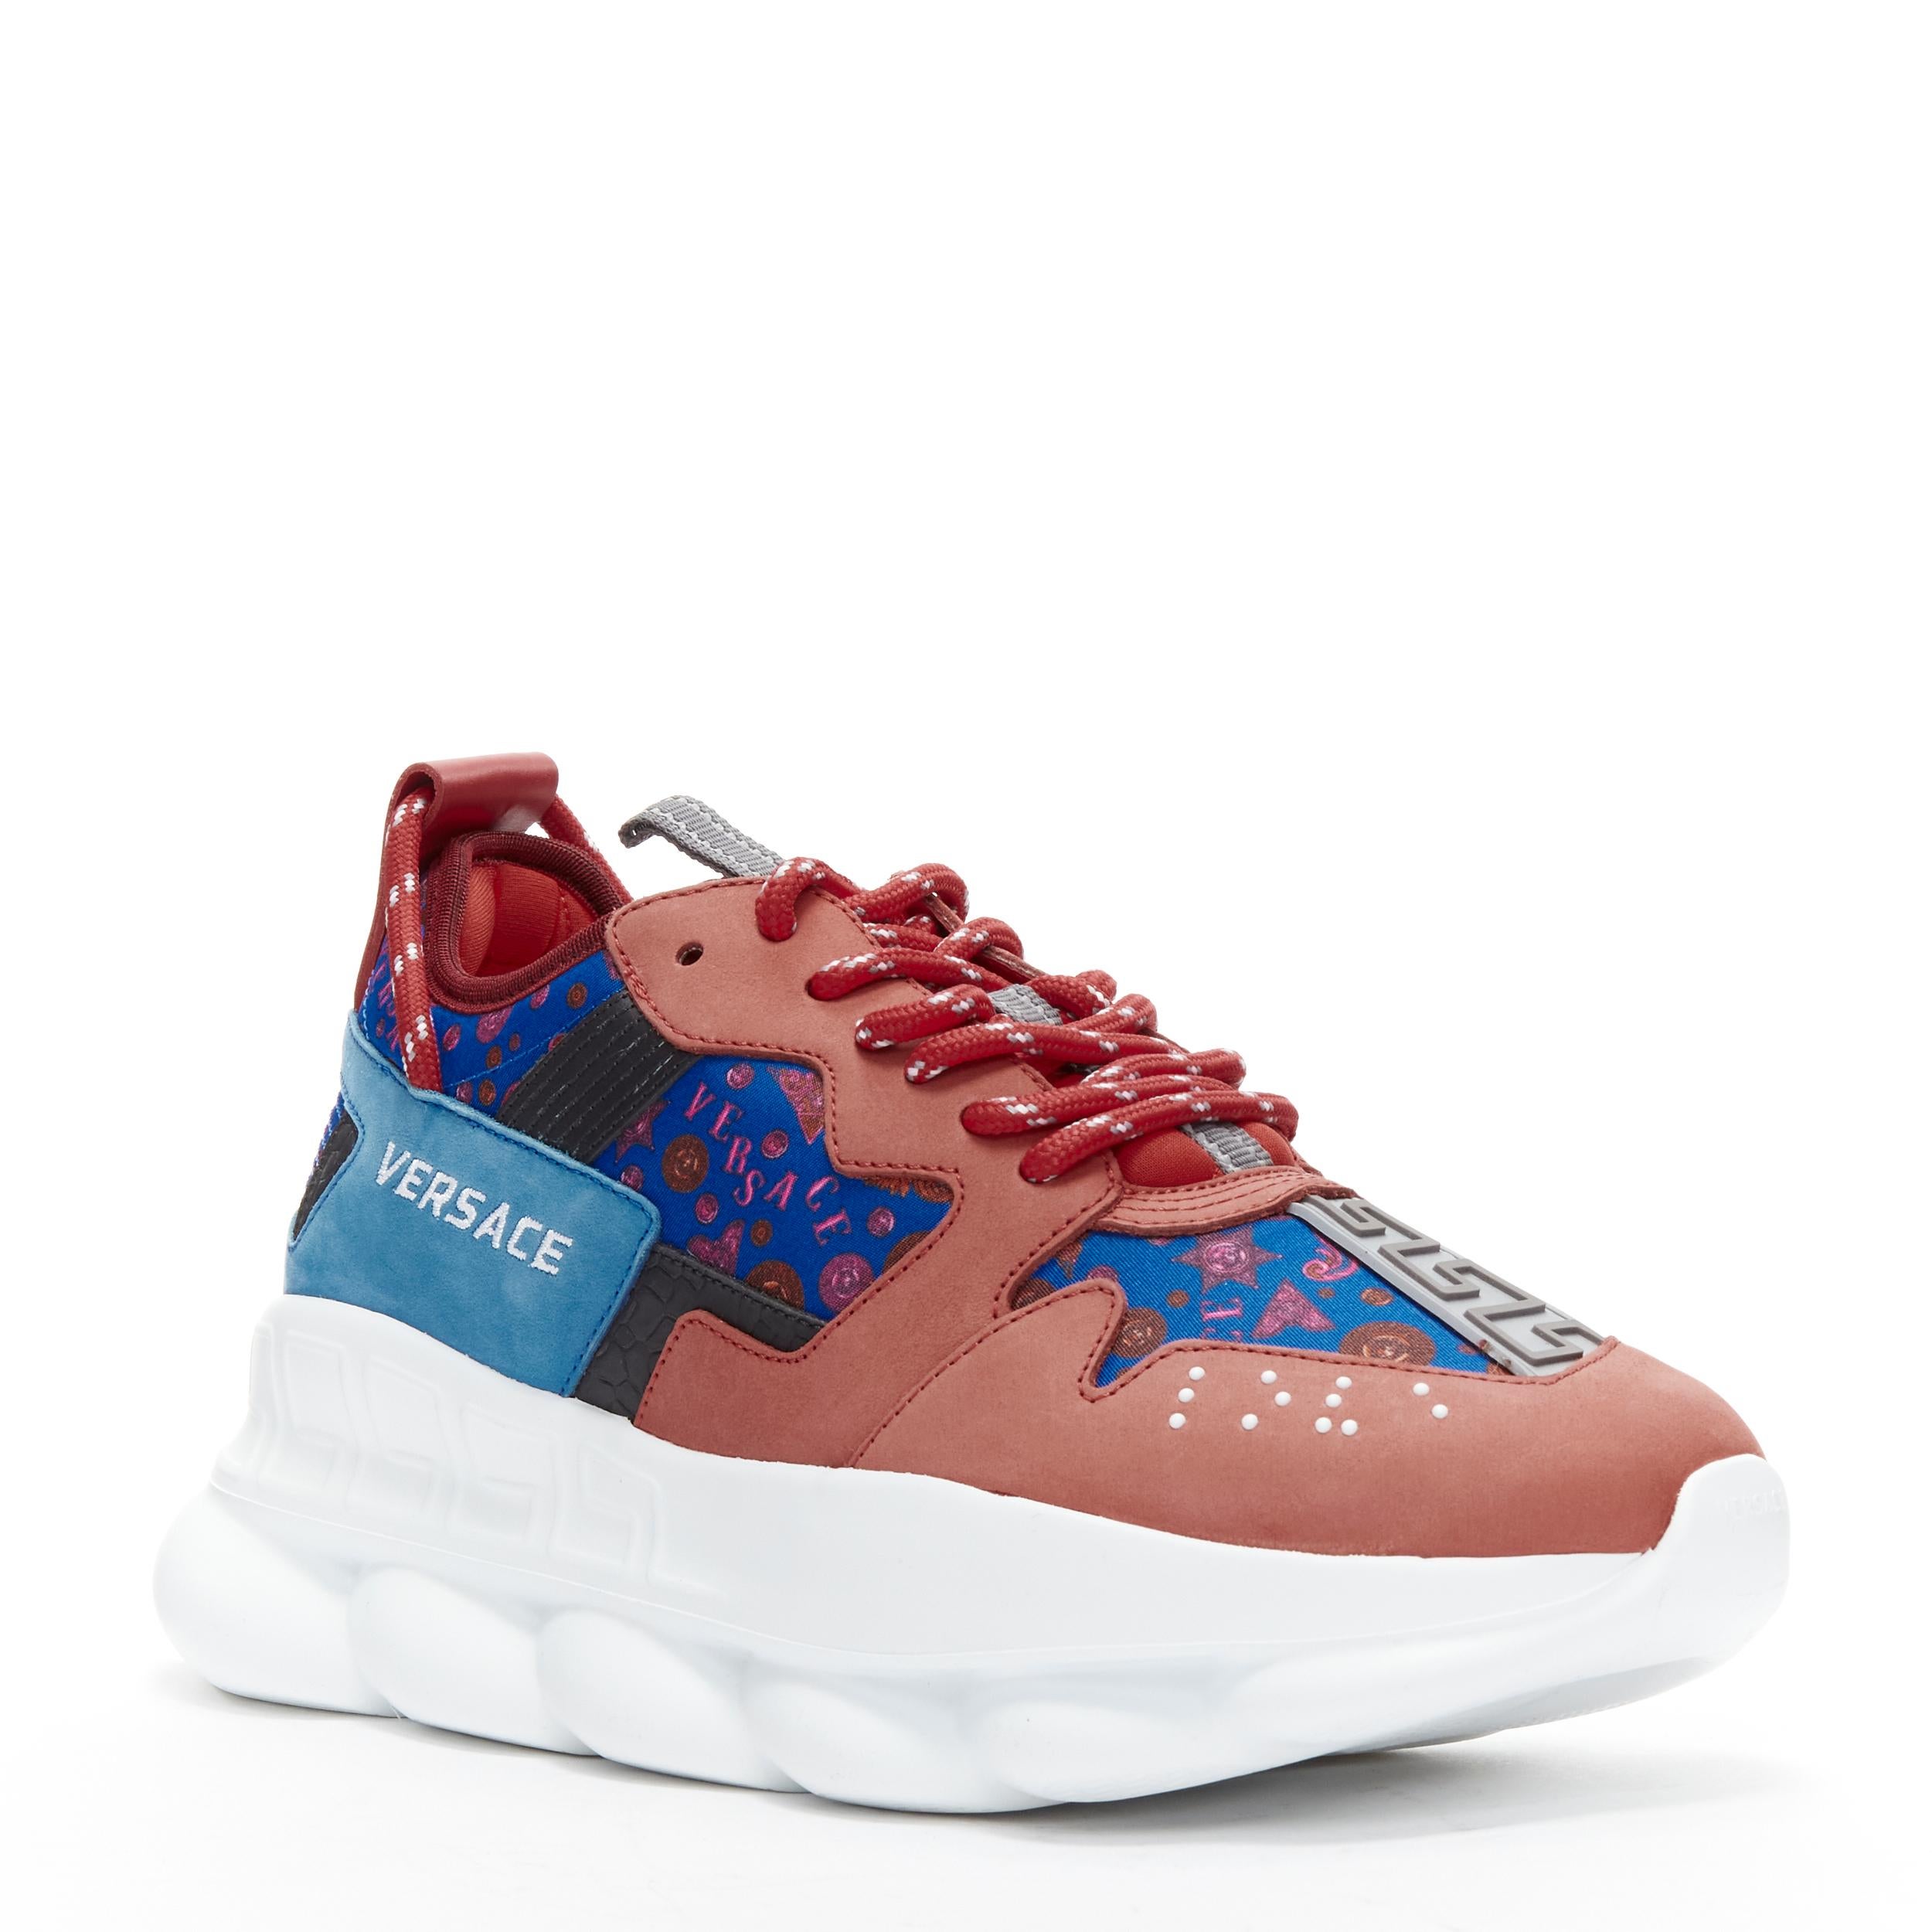 new VERSACE Chain Reaction Salehe Bembury Red Medallion blue sneaker EU40.5
Reference: TGAS/B01470
Brand: Versace
Designer: Donatella Versace
Model: Versace Chain Reaction
Material: Fabric, Leather
Color: Red, Blue
Pattern: Abstract
Closure: Lace